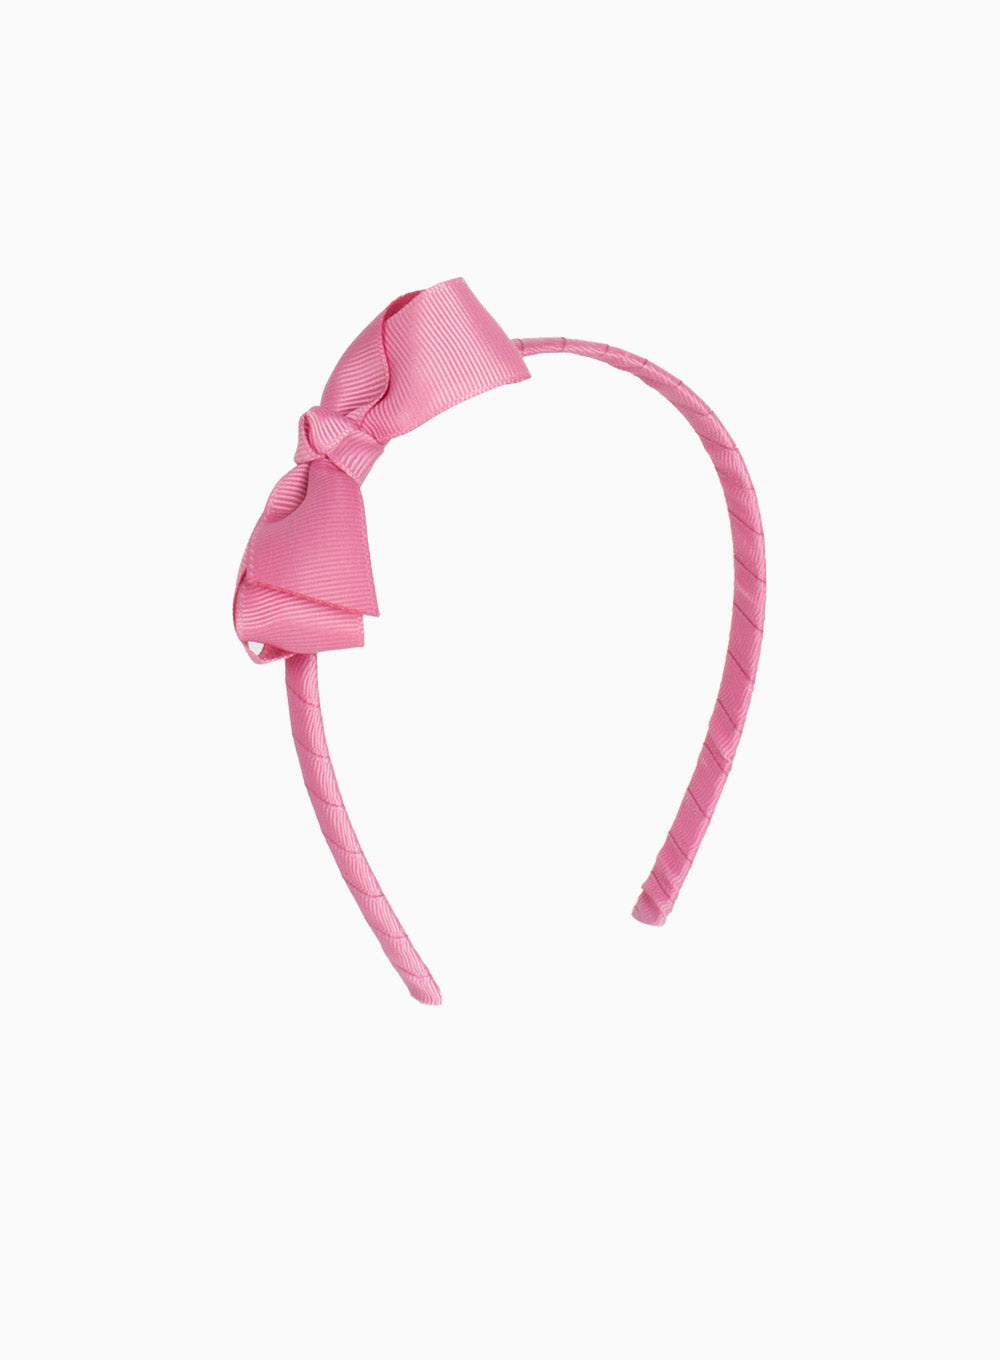 Pretty Bow Alice Band in Dusky Pink